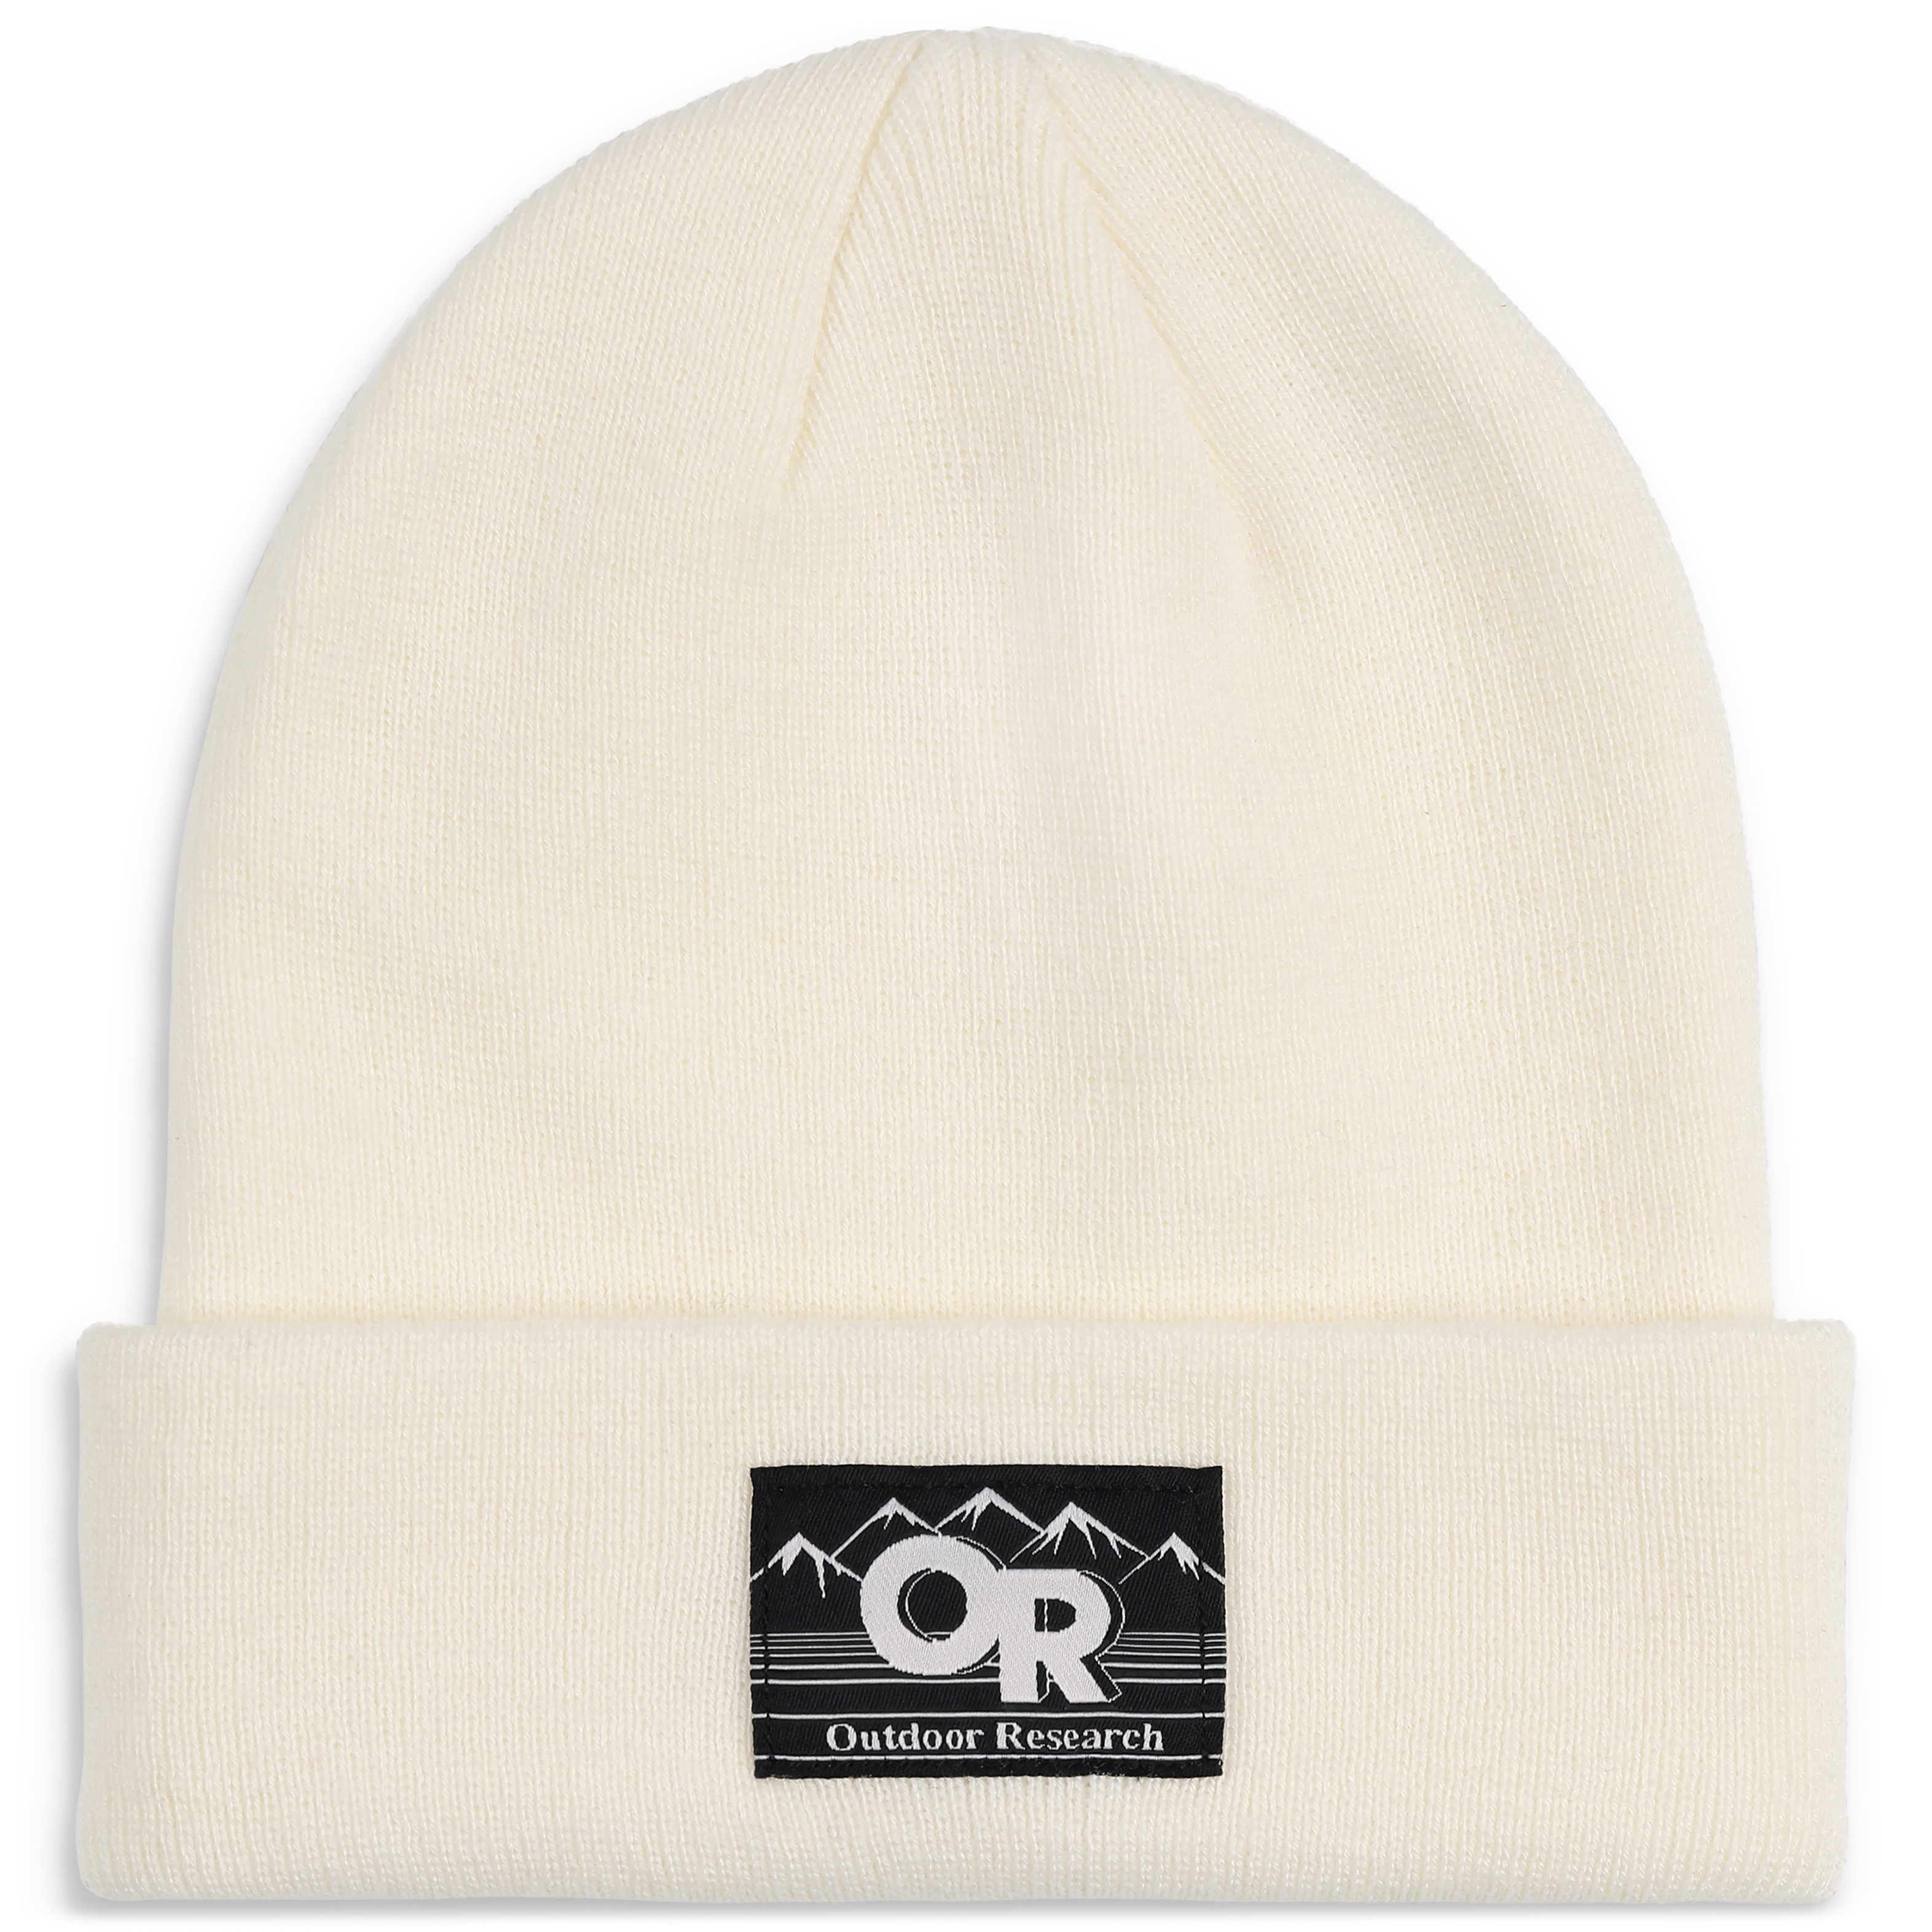 100% Soft Acrylic - Black Single Piece Solid Color Beanie Classic